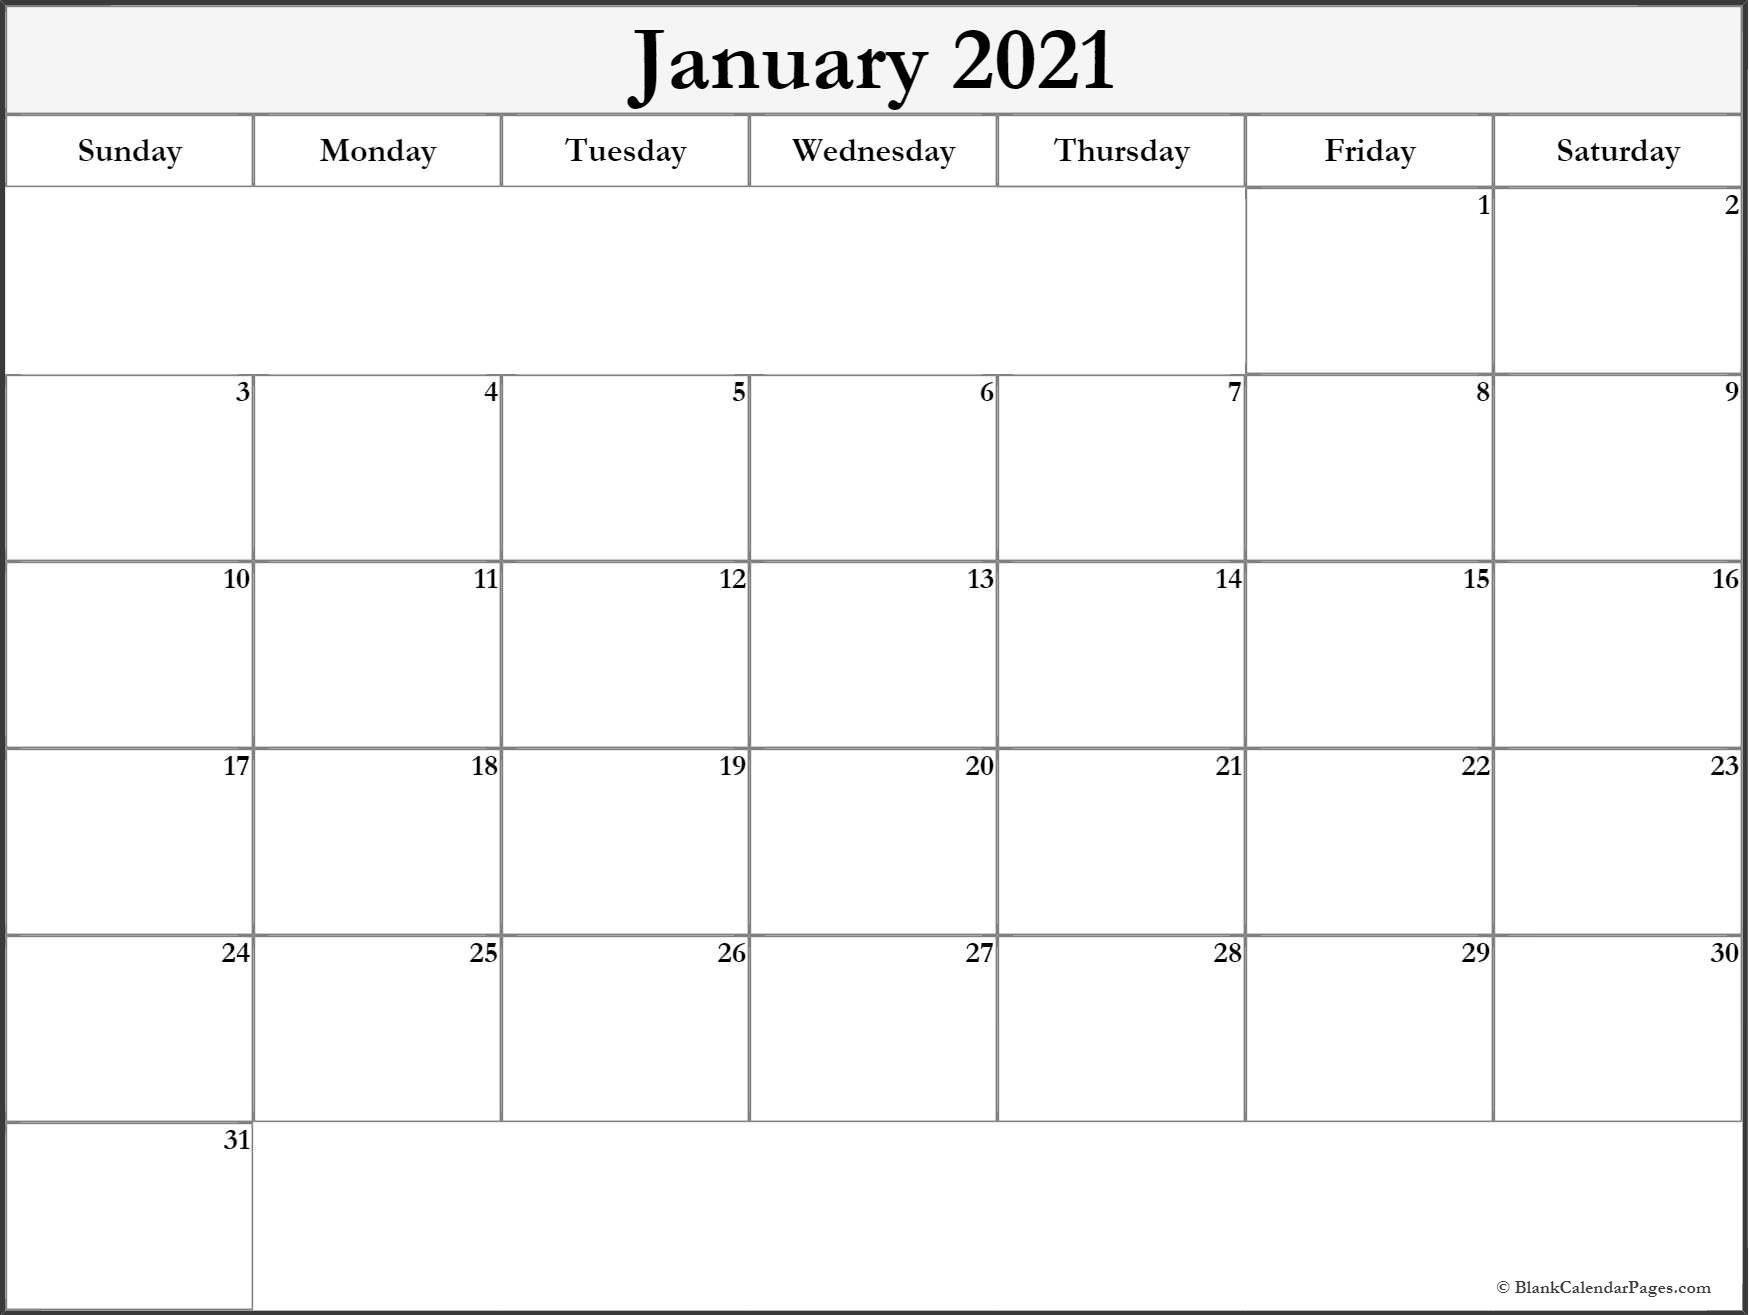 January 2021 Blank Calendar Collection.-Printable Calendar 2021 Monthly That Can Be Edited